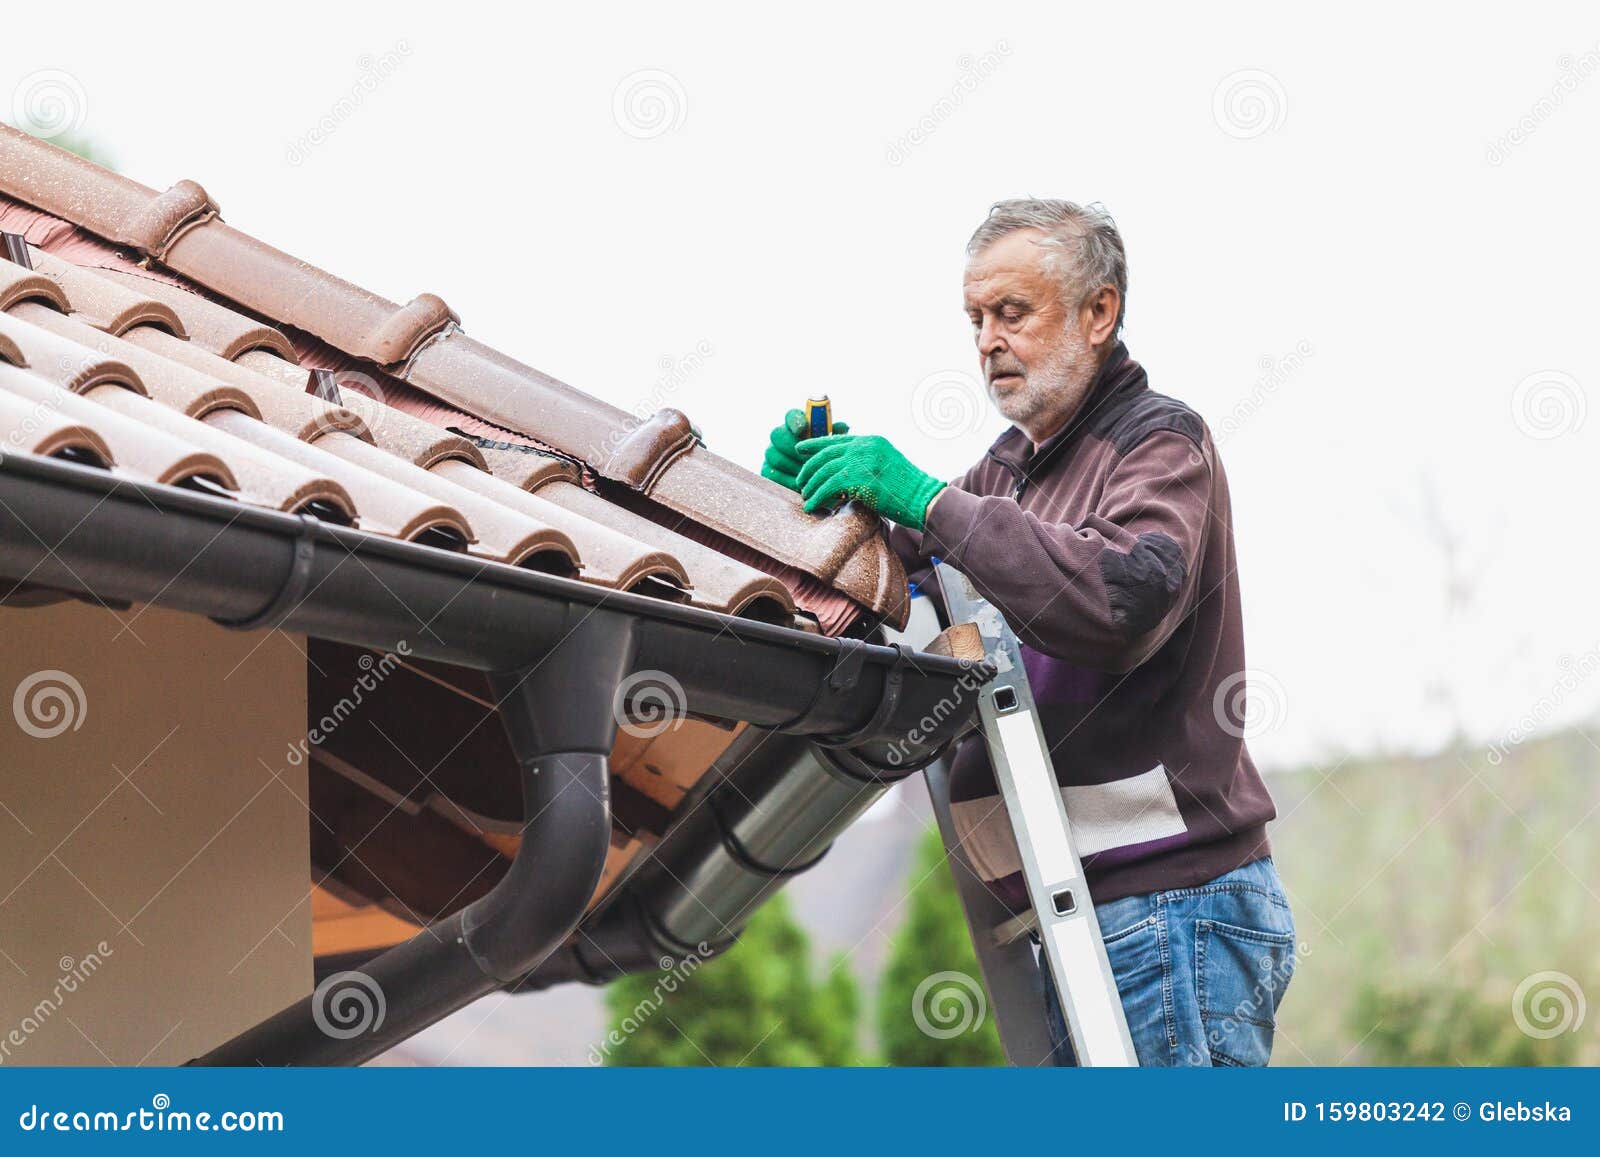 Man Repairs Tiled Roof Of House Close Up Stock Photo Image of manual, protection 159803242